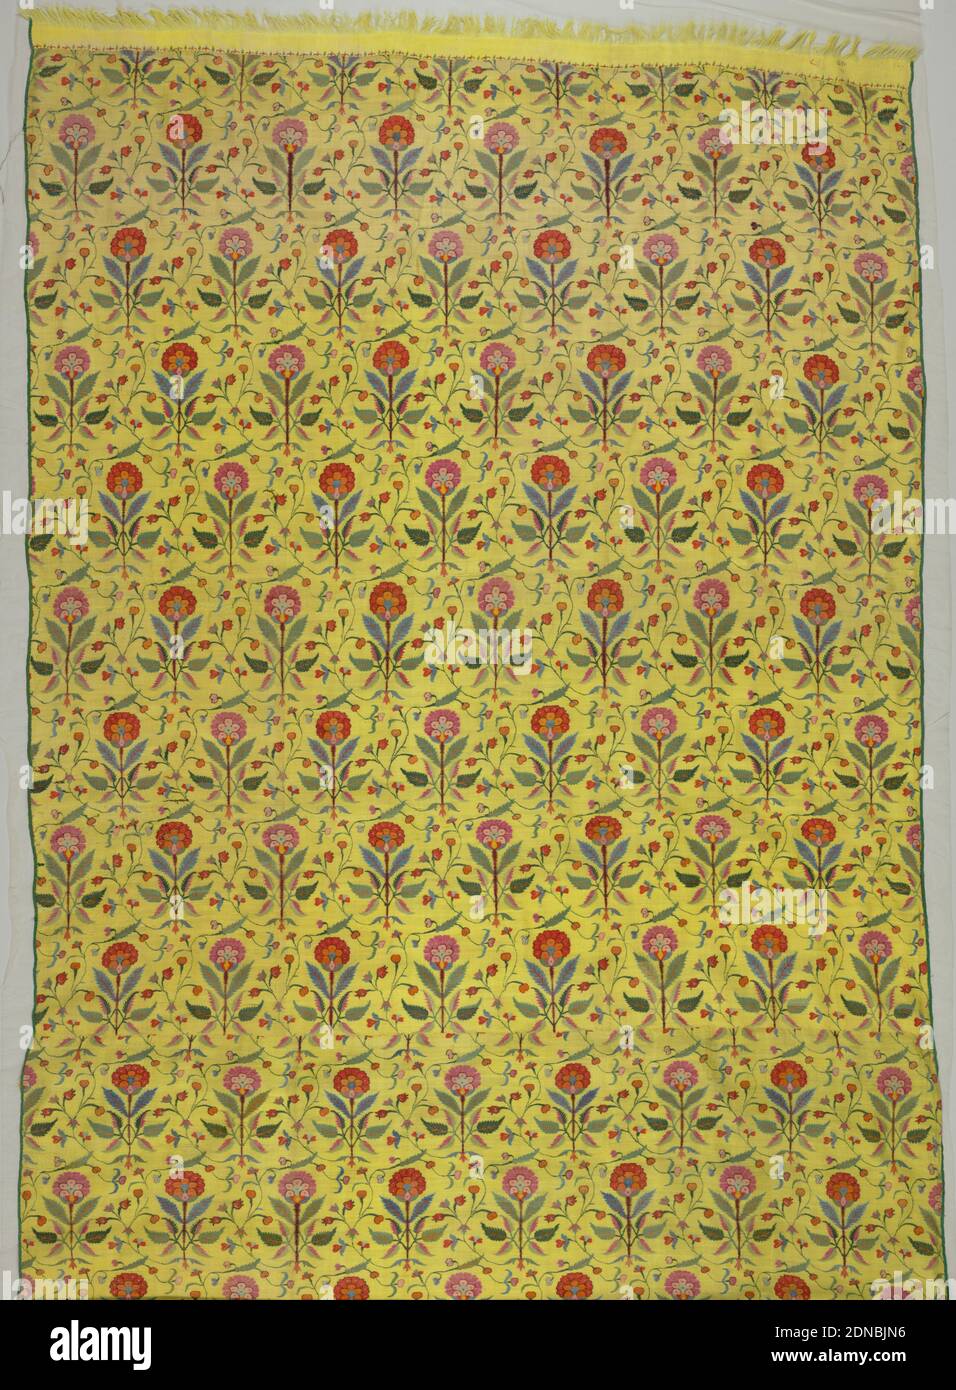 Shawl, Medium: wool Technique: tapestry weave, Shawl made of two pieces joined together and finished on the long sides with narrow green braid, and on the short sides, with yellow embroidered and fringed fabric. Pattern is red, pink, blue and green upright flowers and vines on a yellow ground., India, 18th century, costume & accessories, Shawl Stock Photo